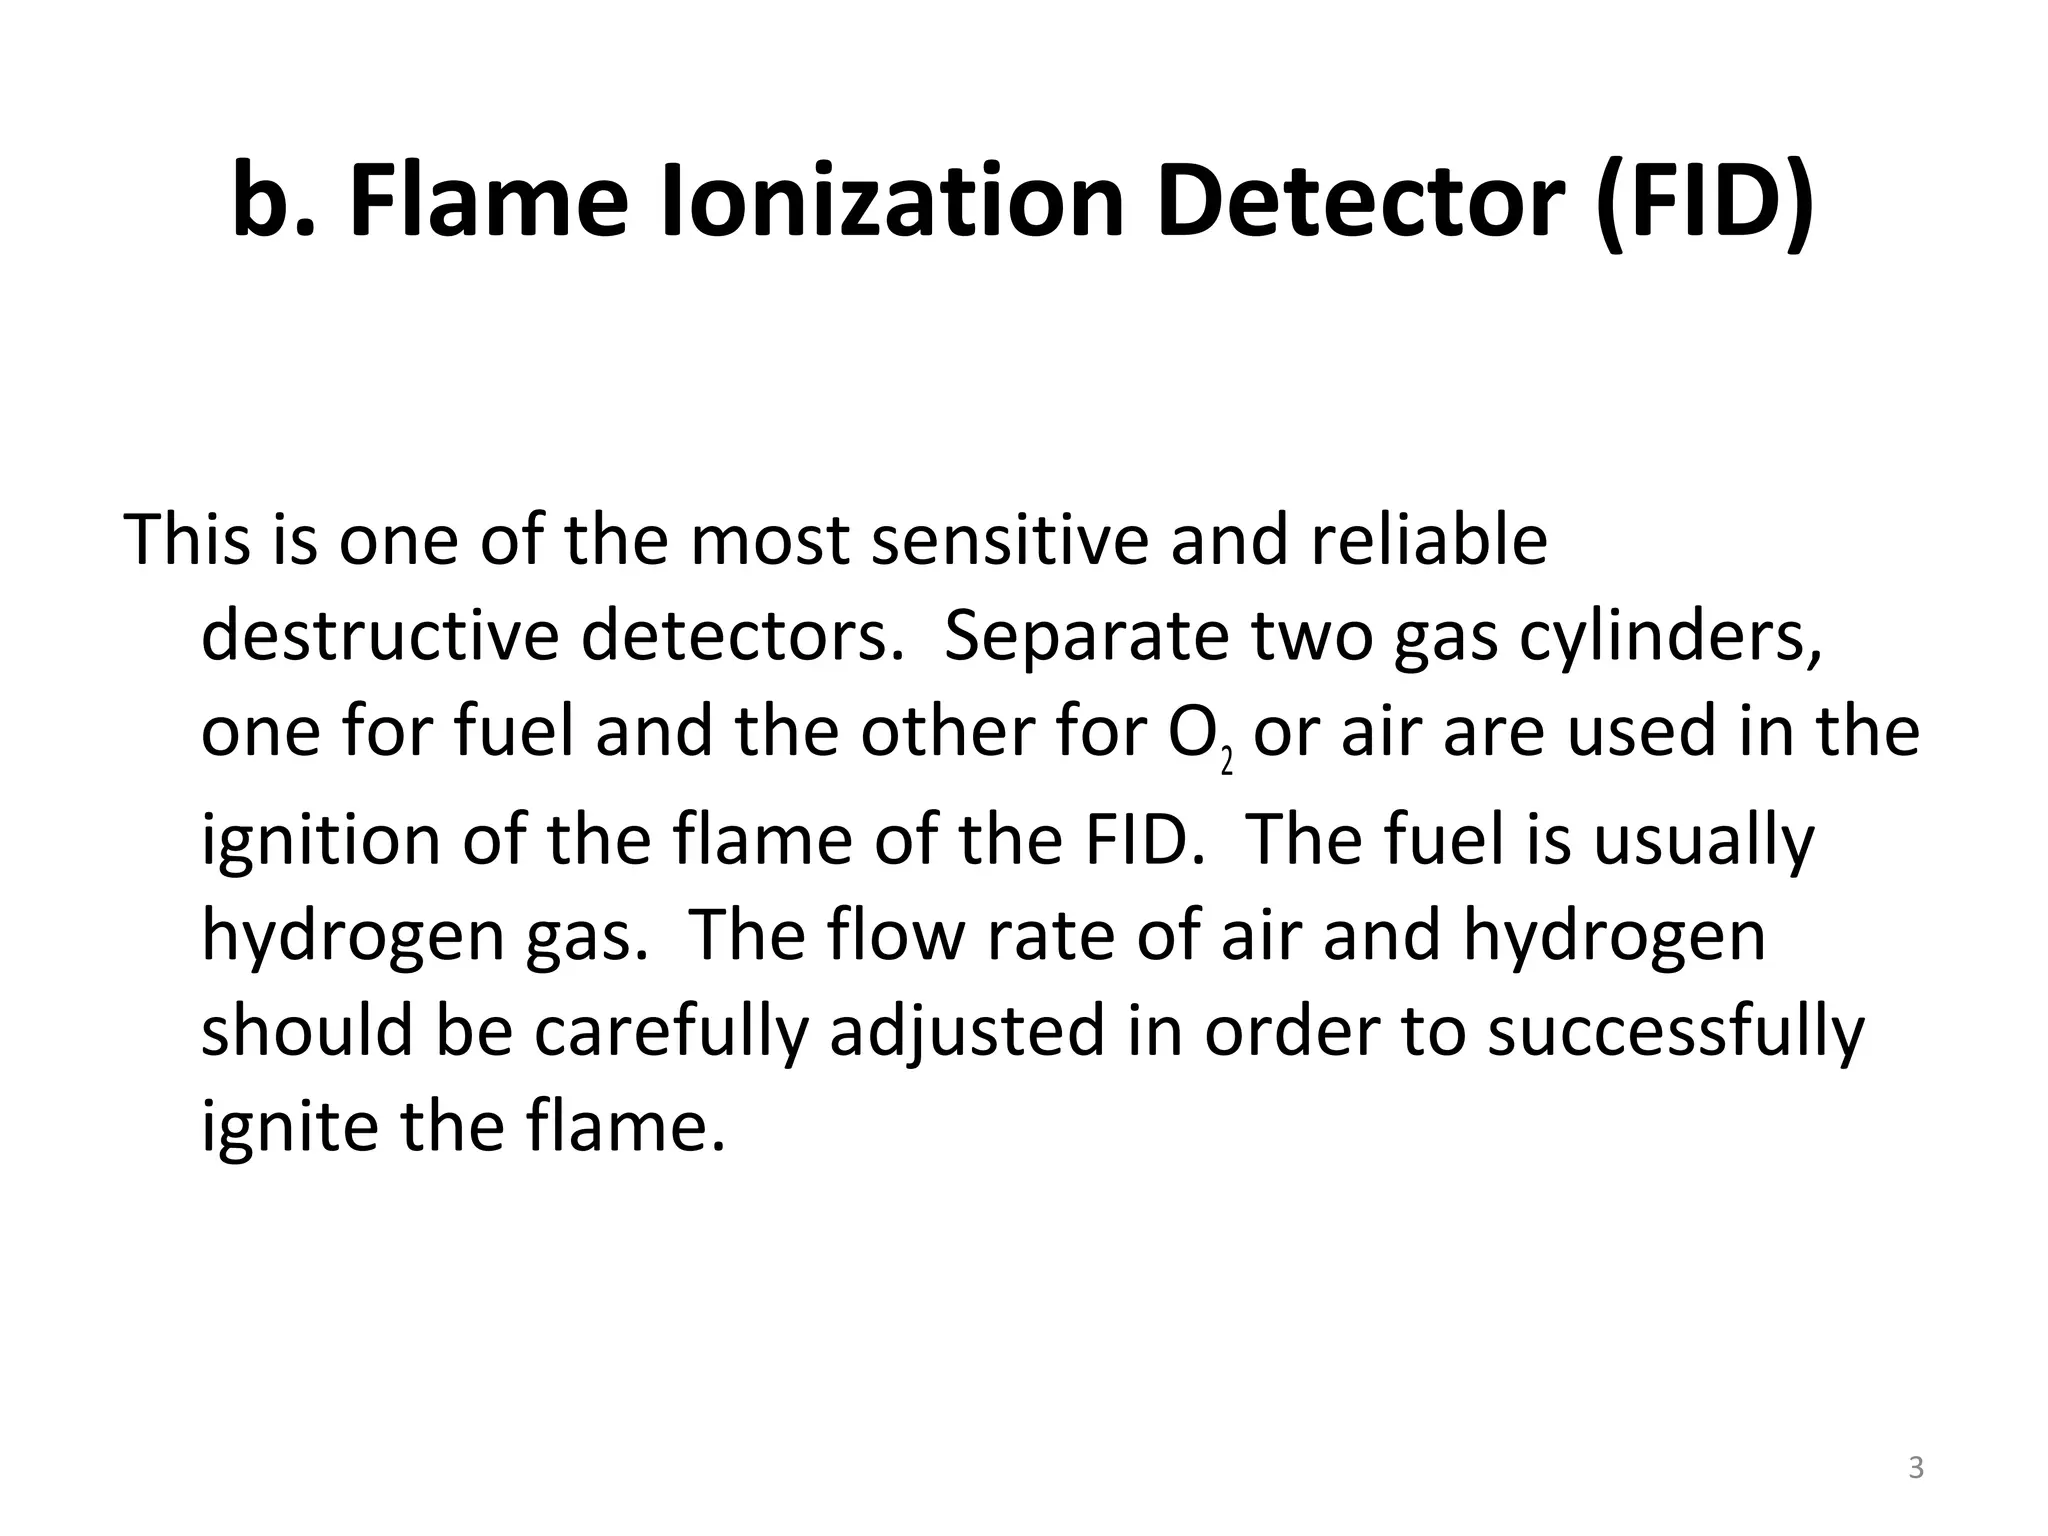 Flame ionization detector